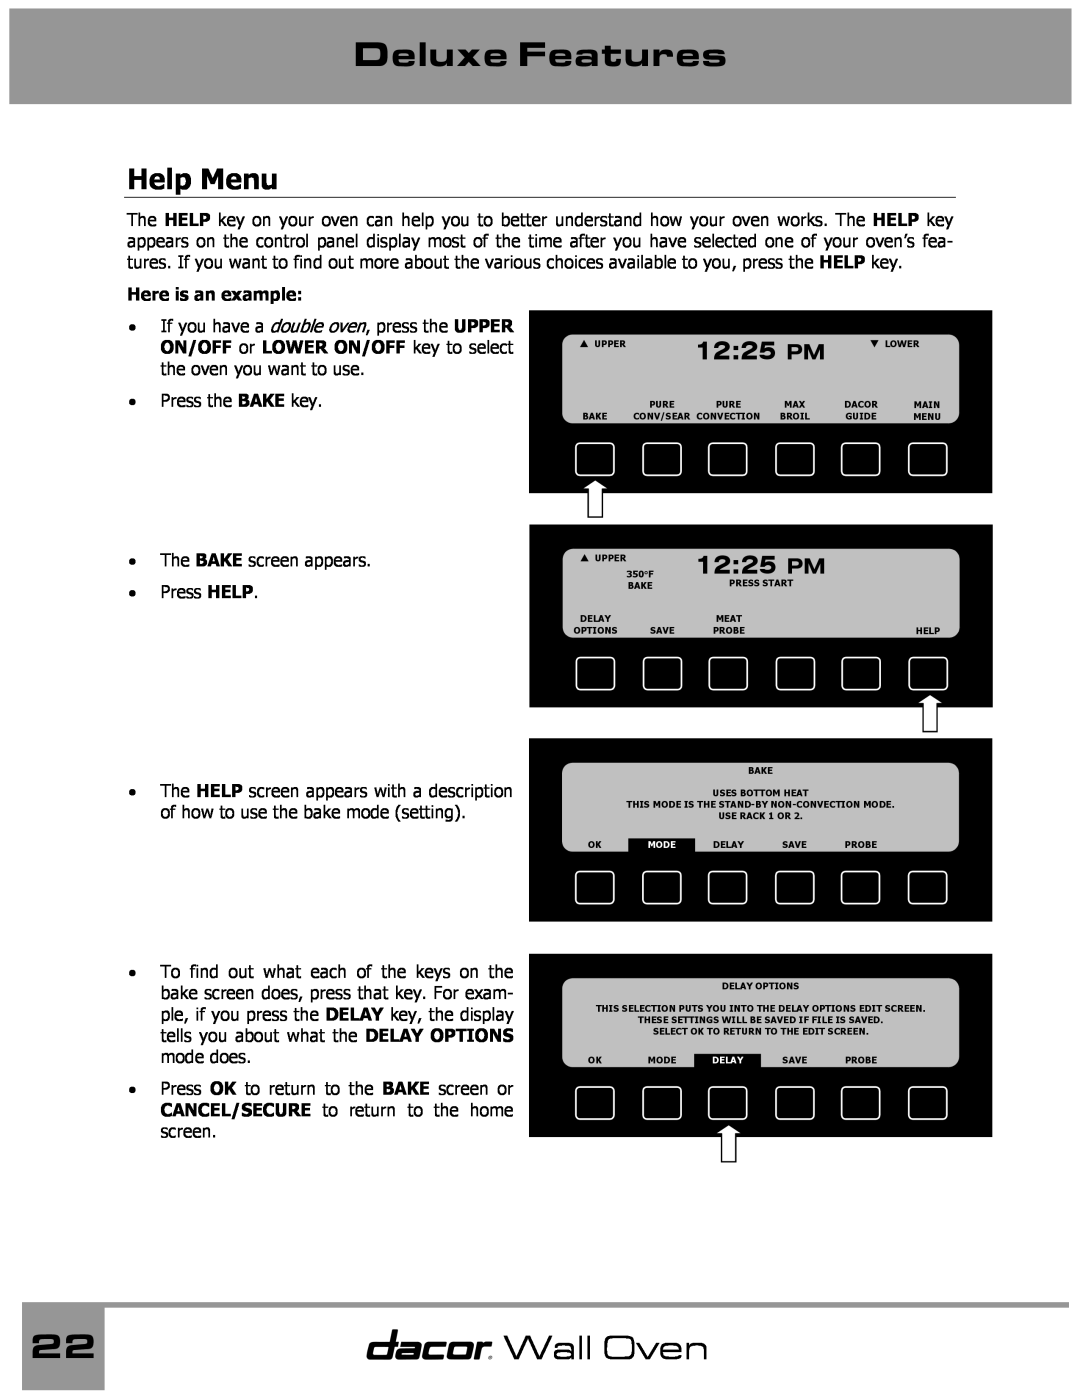 Dacor Wall Oven manual Deluxe Features, Help Menu, 1225 PM, Here is an example 